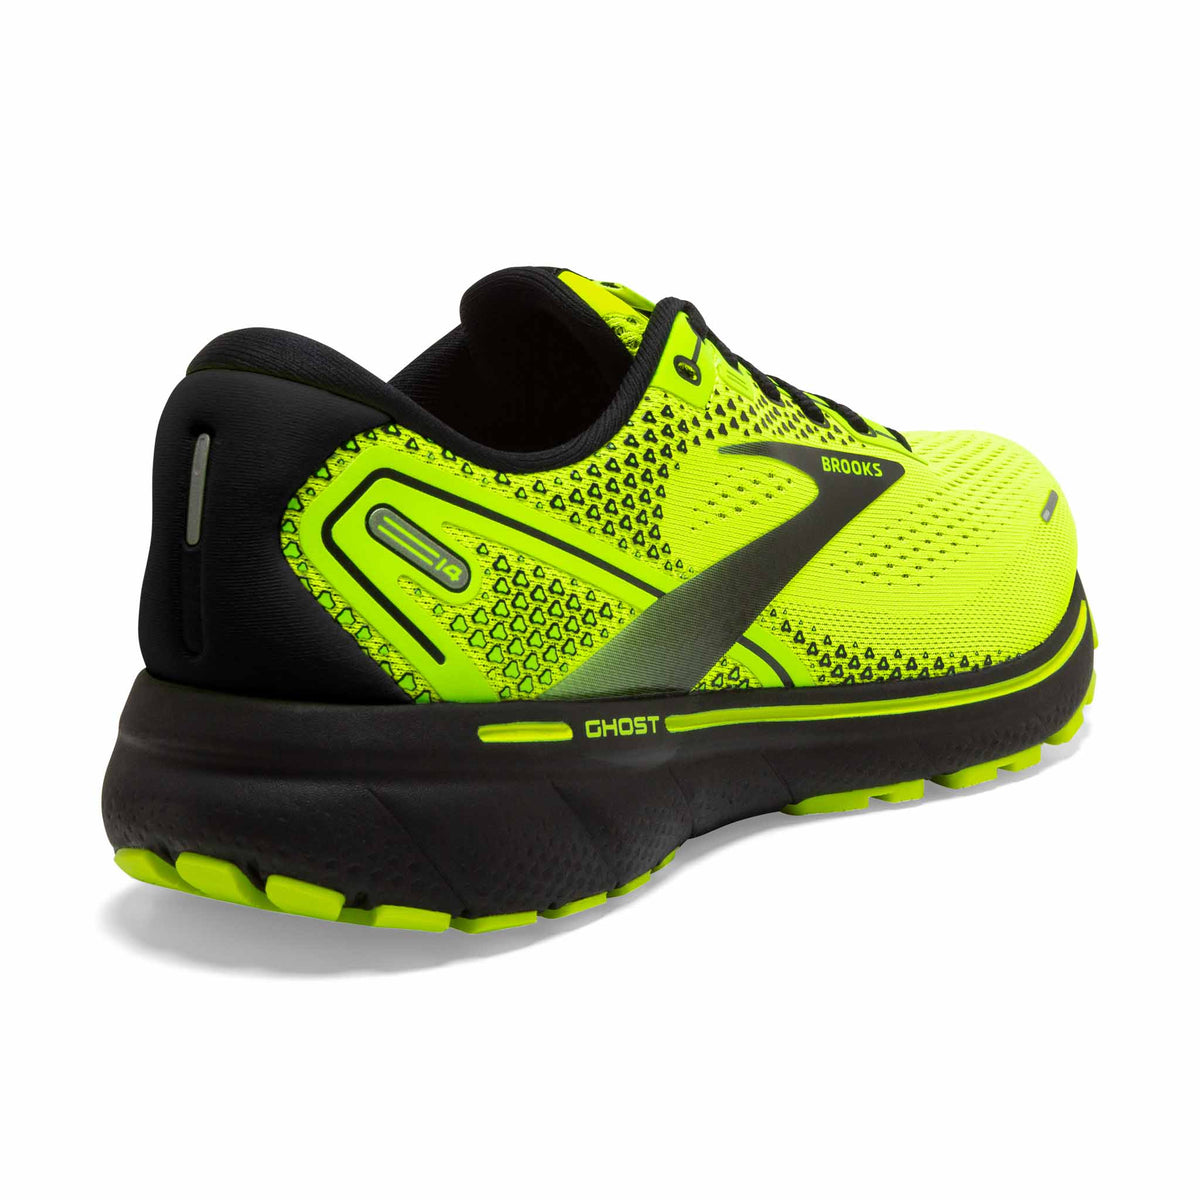 Brooks Ghost 14 chaussures de course a pied pour homme - Nightlife / Black - angle 2